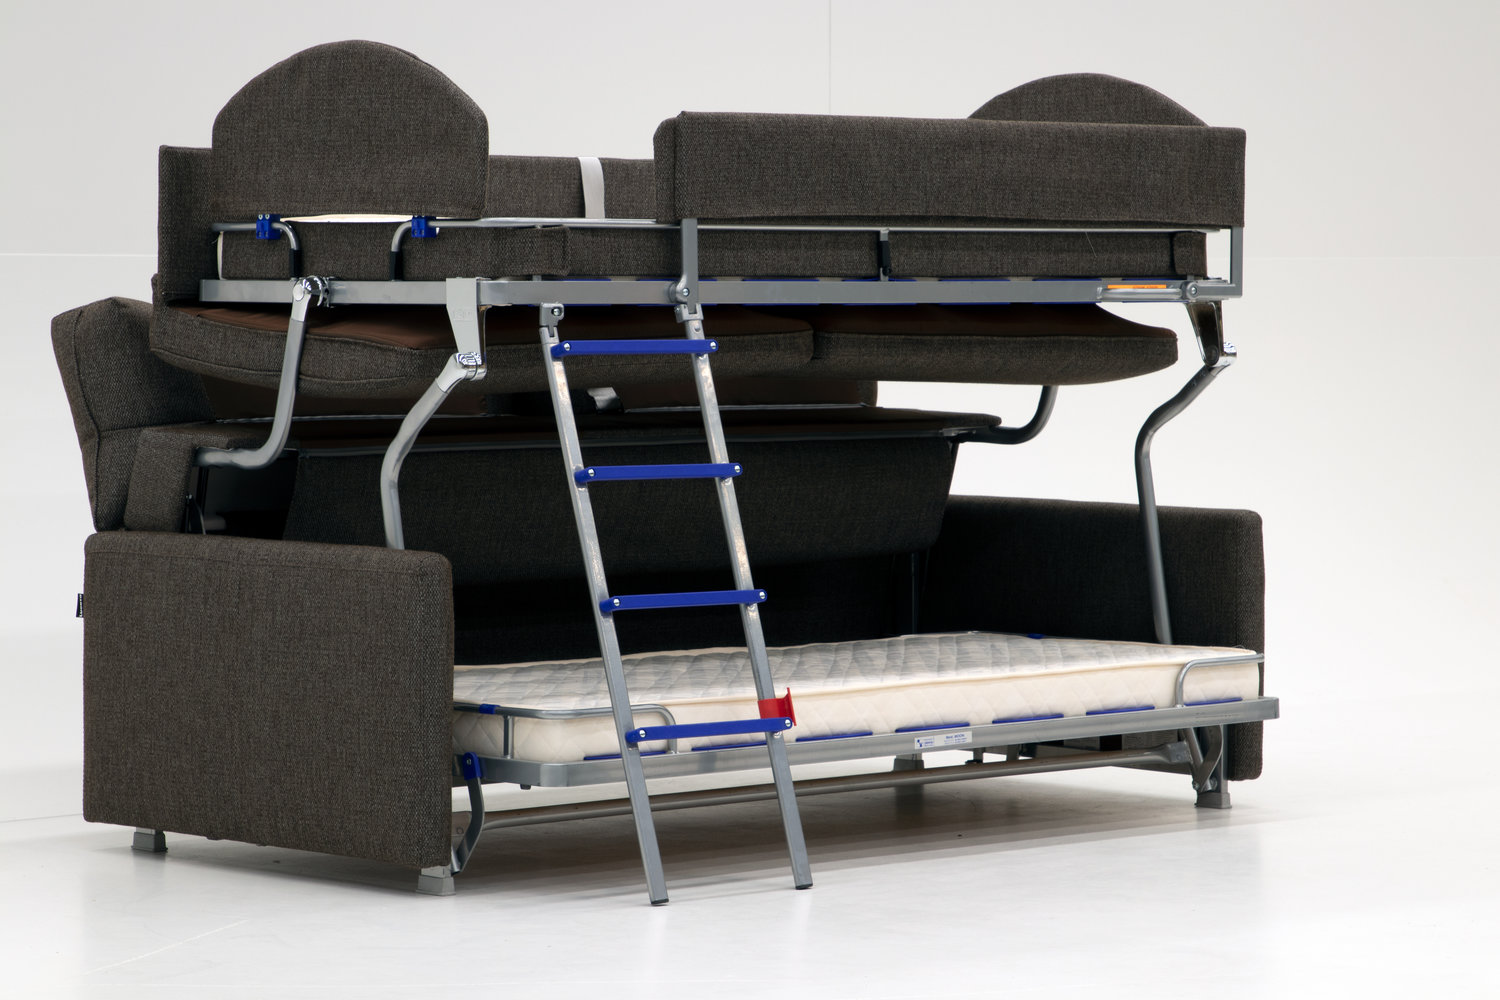 Elevate Bunk Sofa Bed M Collection Home, Proteas Bunk Bed Couch